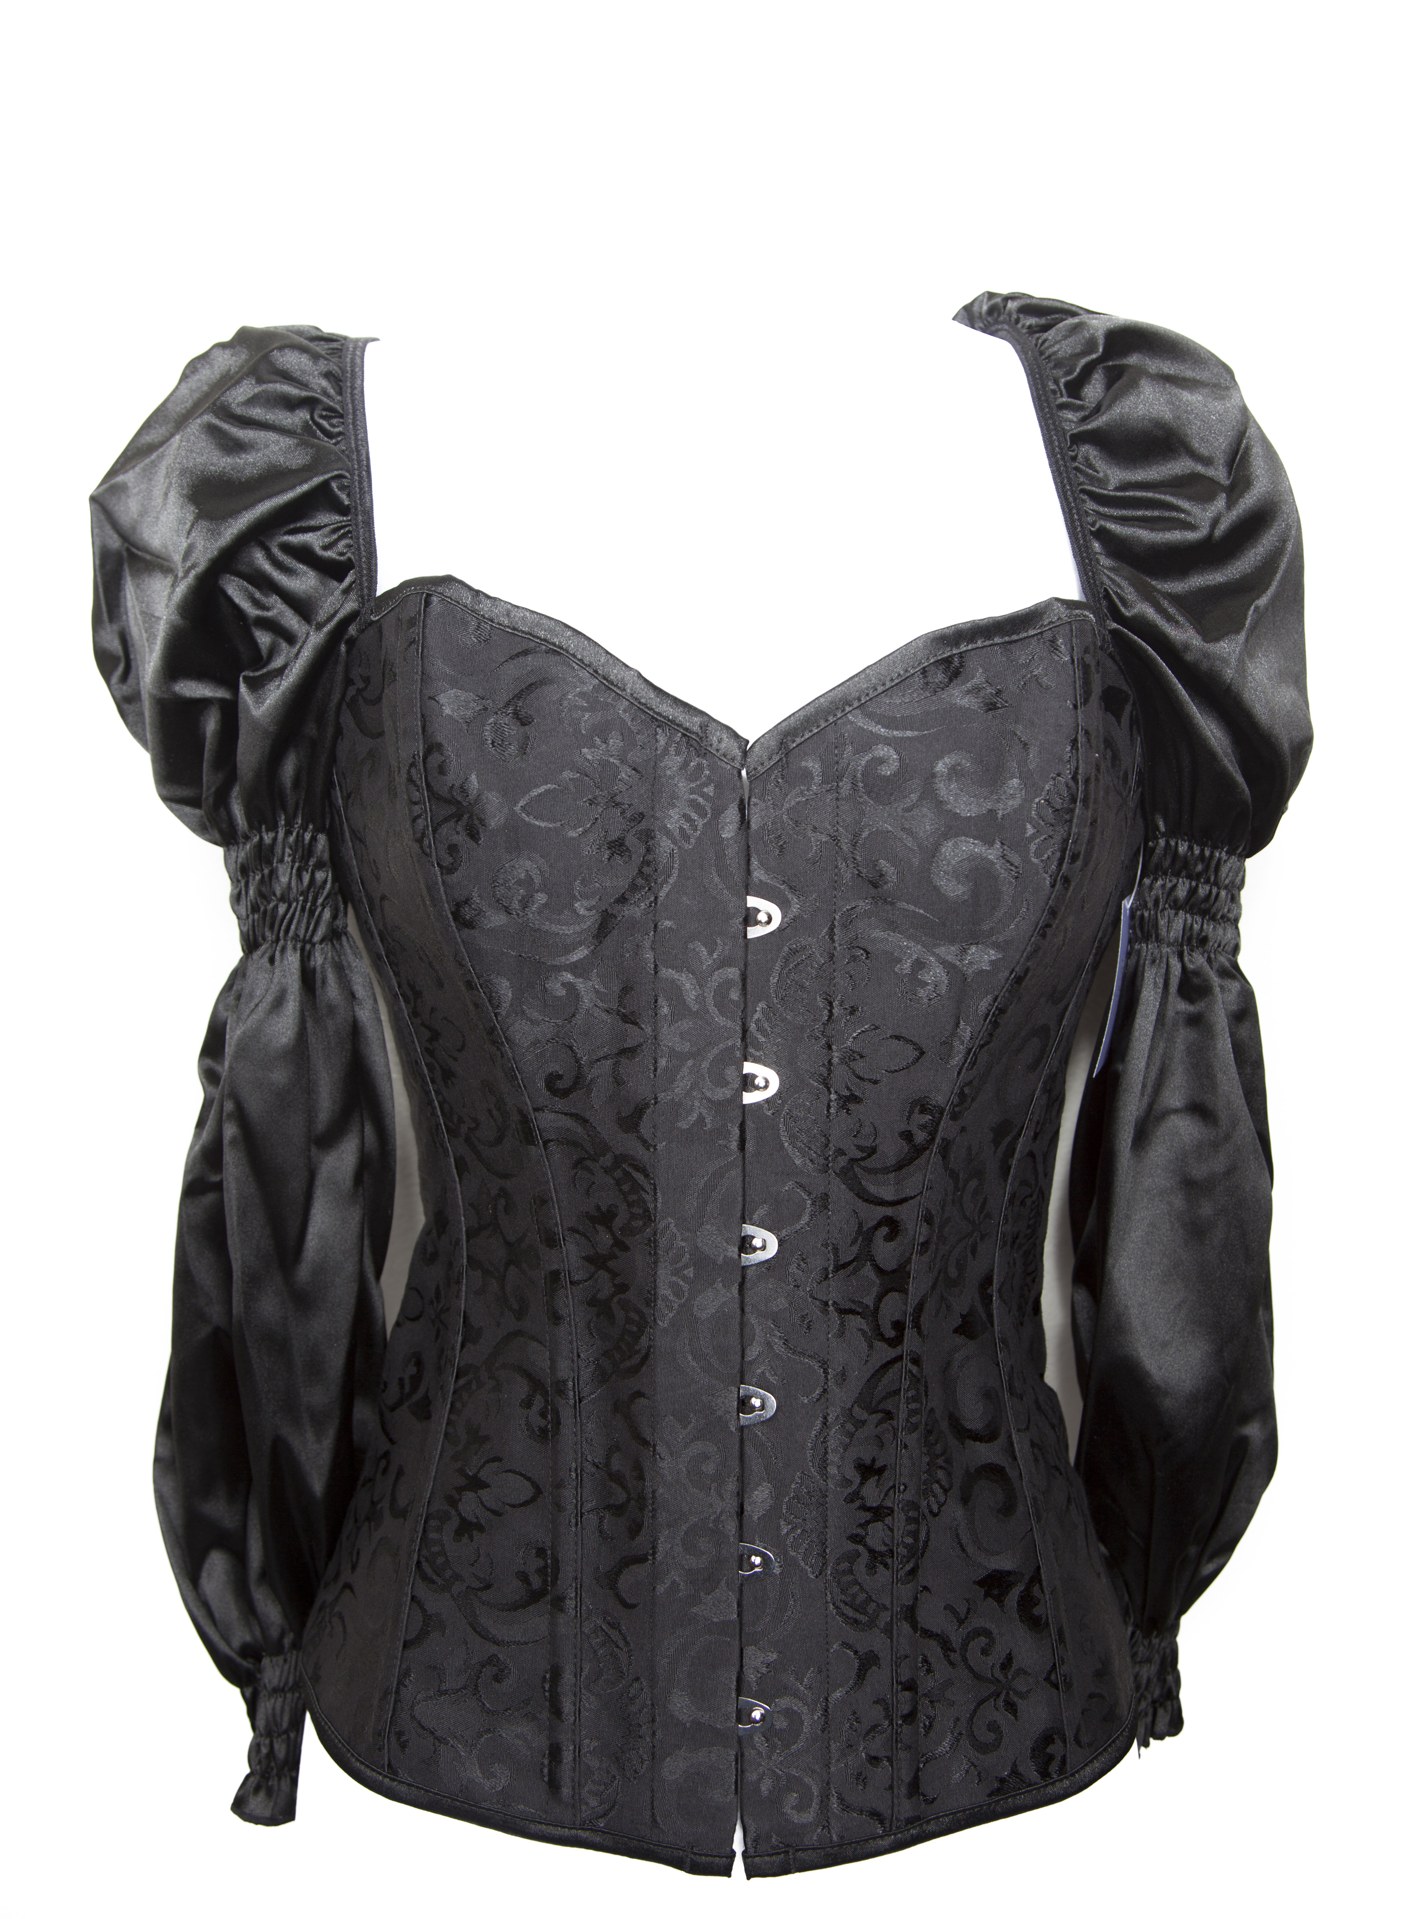 Women's Steampunk Sweet and Sassy Corset With Sleeves